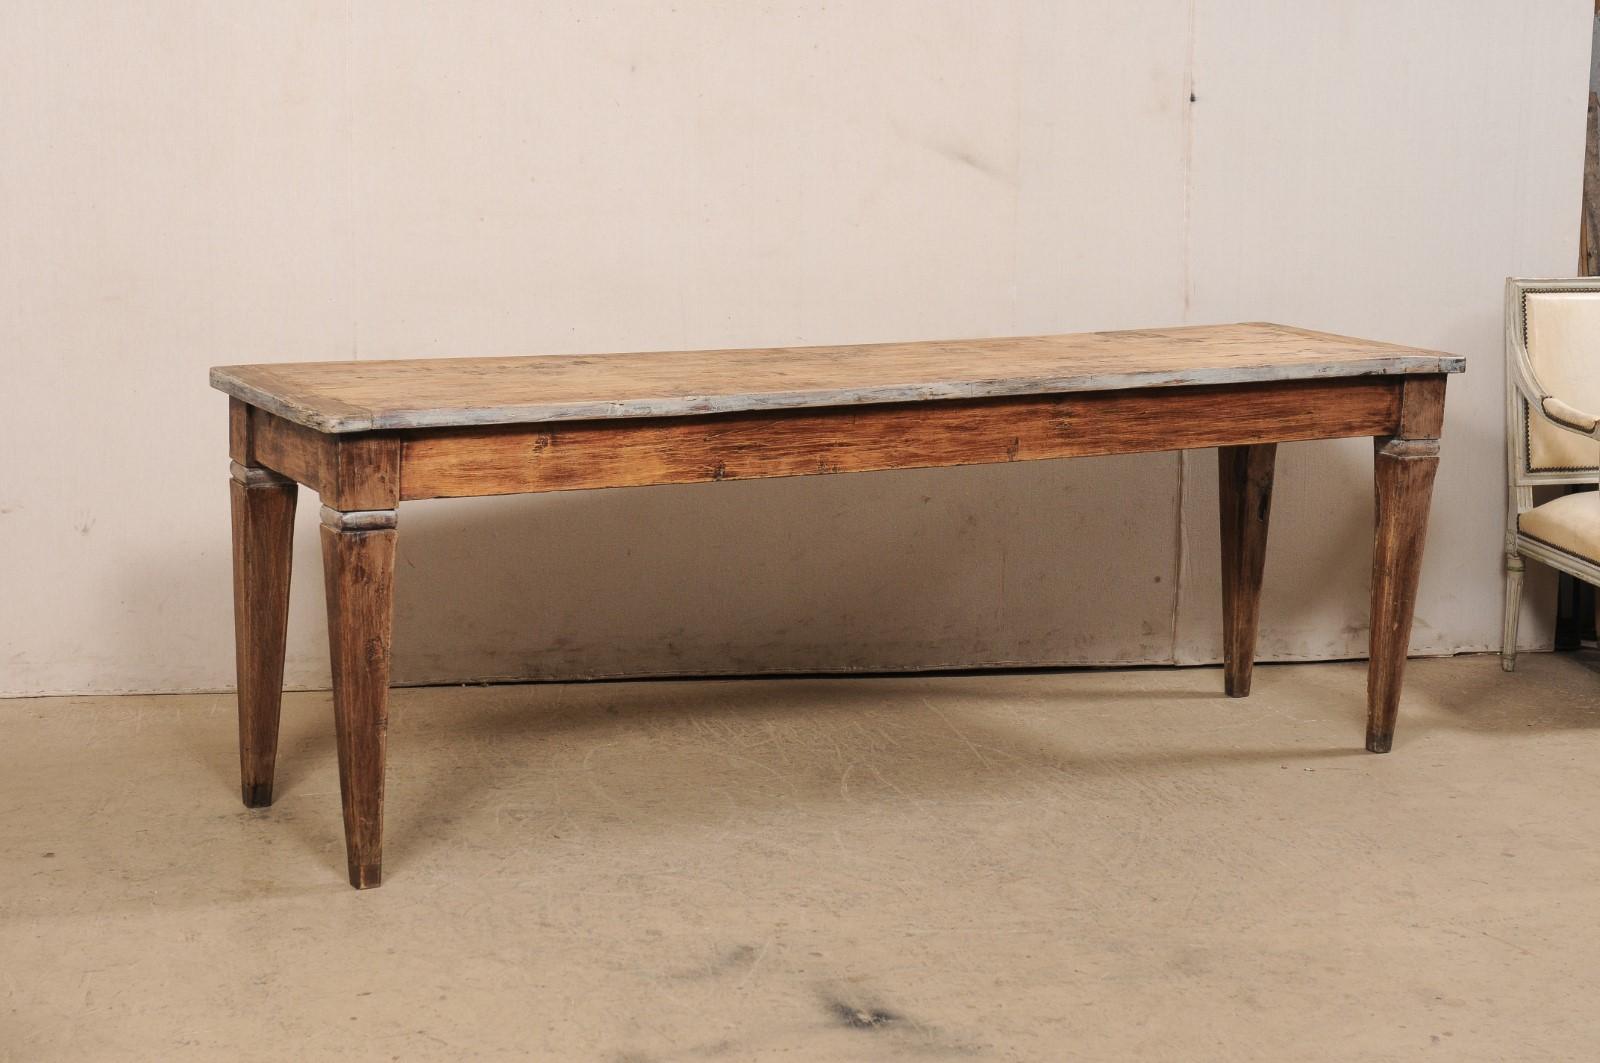 An Italian wood console table, approximately 7.75 feet in length, from the 18th century. This antique table from Italy has a long, rectangular-shaped top, which slightly overhangs the apron below (which is clean and linear), and is presented upon